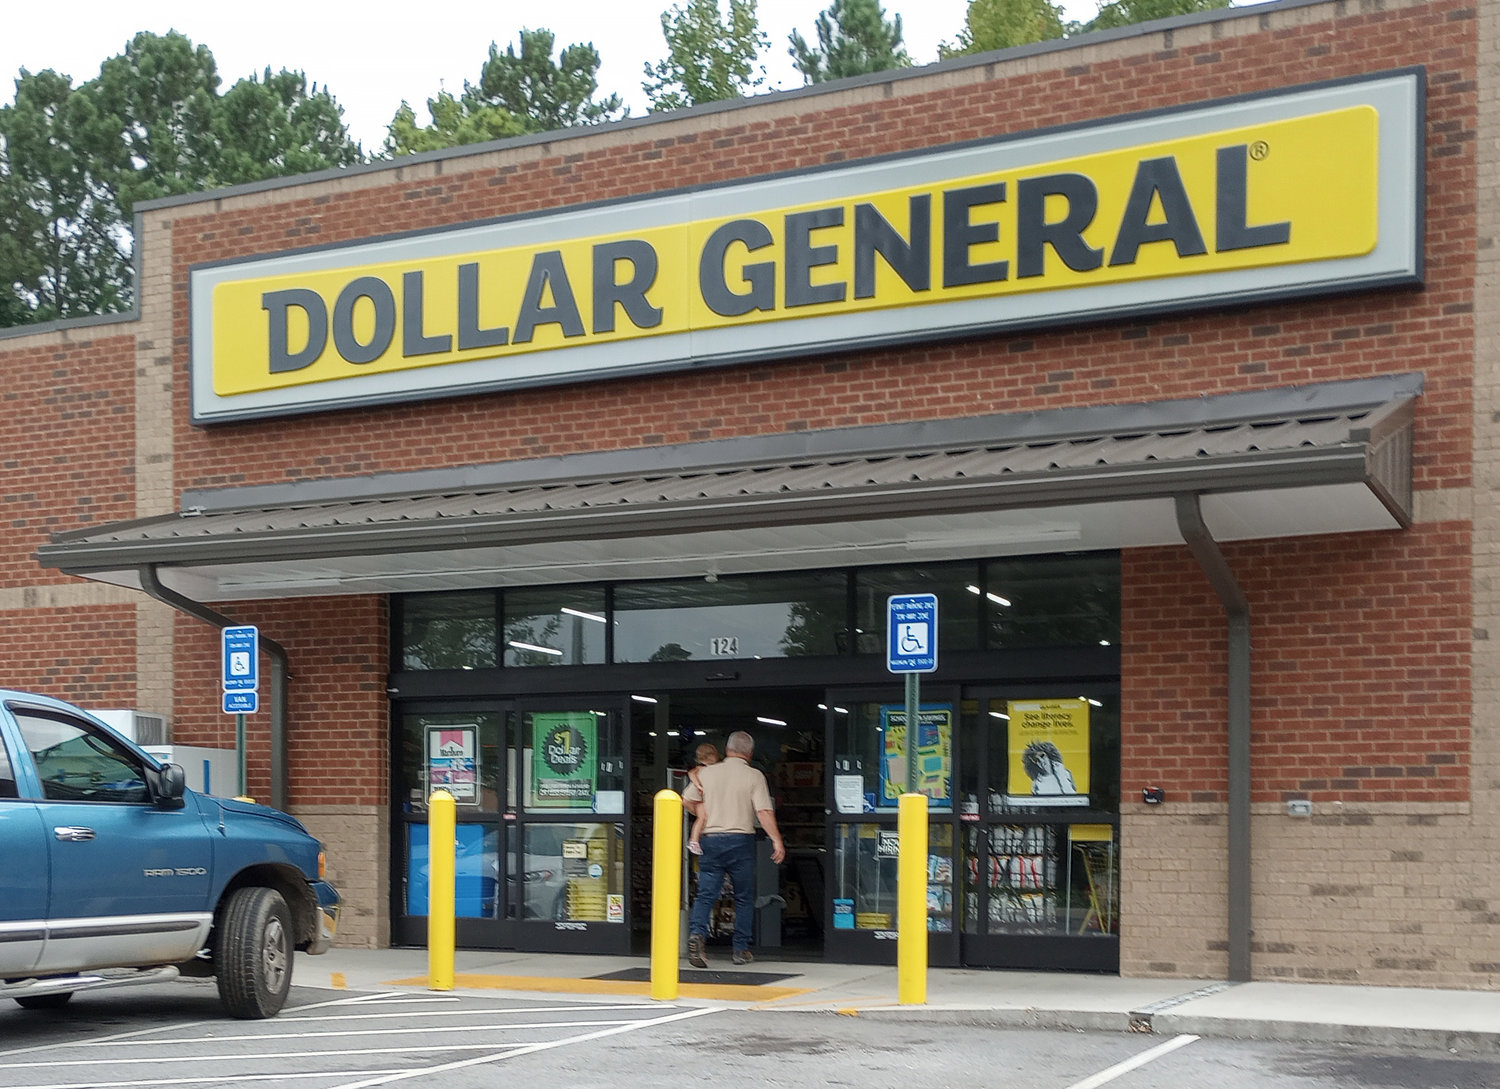 A customer enters a Dollar General store in Dallas, Ga., Wednesday, Aug. 17, 2022. (Christian Index/Henry Durand)